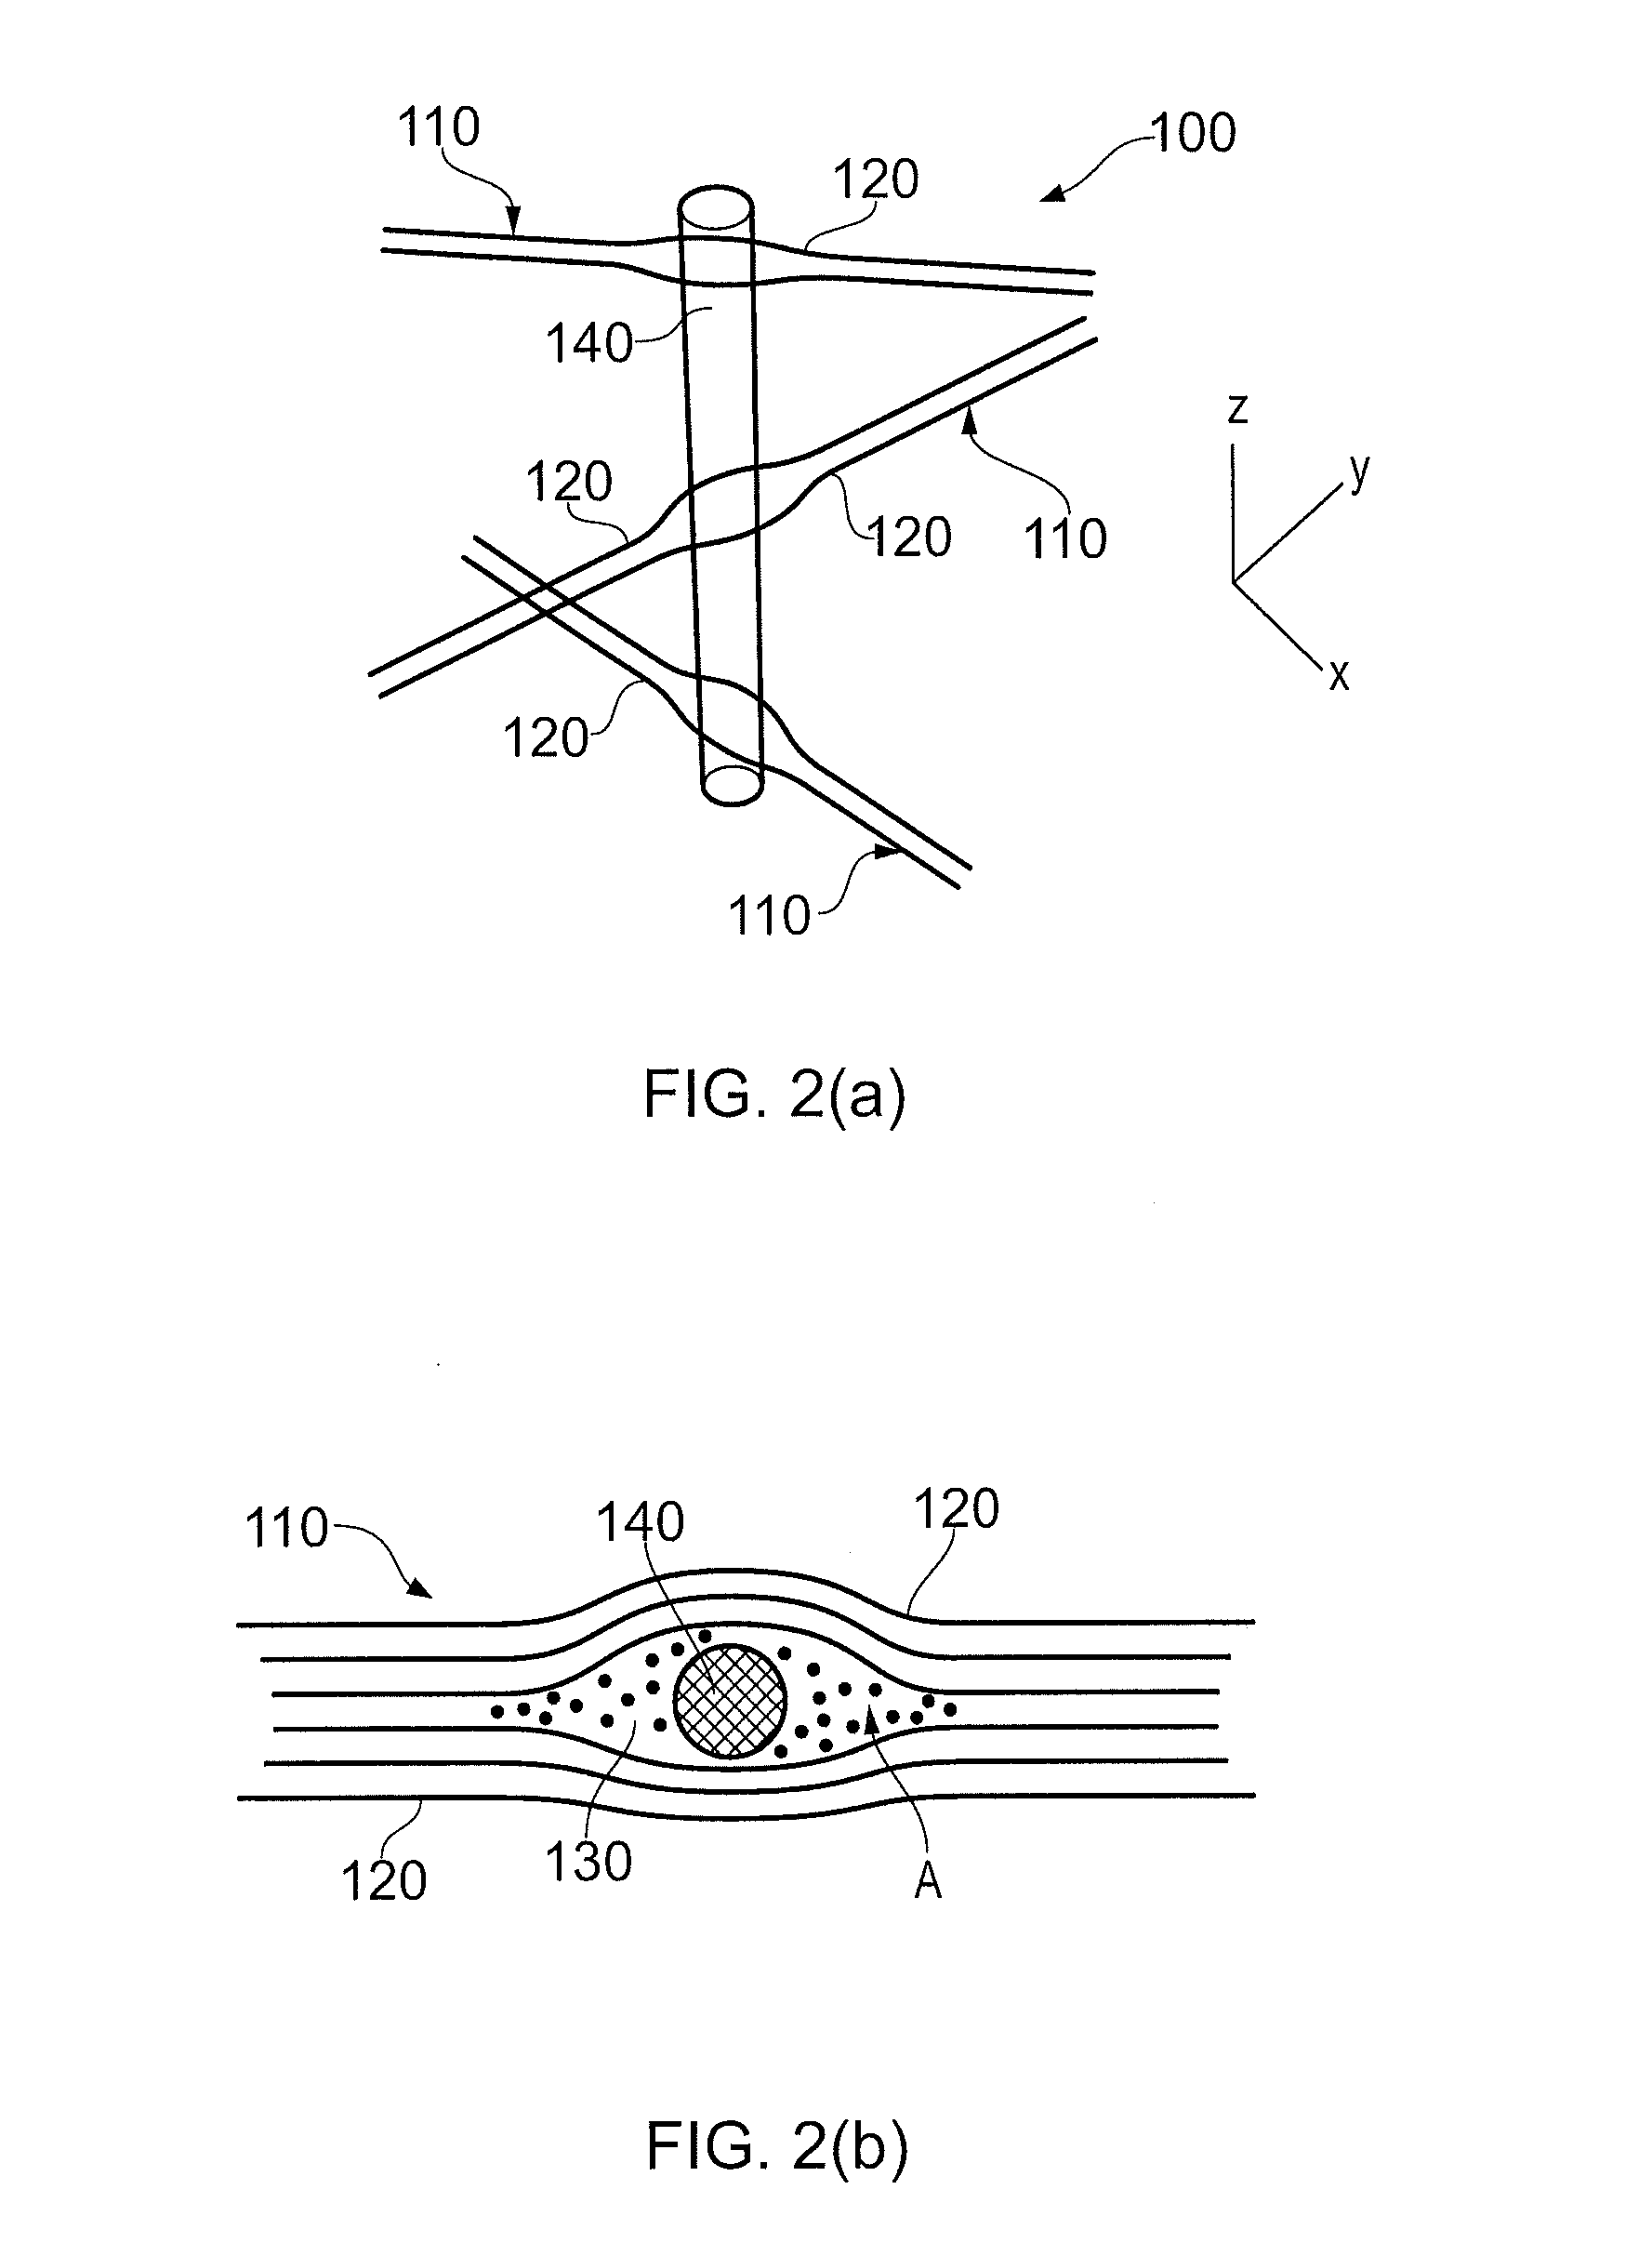 Method of manufacturing a composite material including a thermoplastic coated reinforcing element